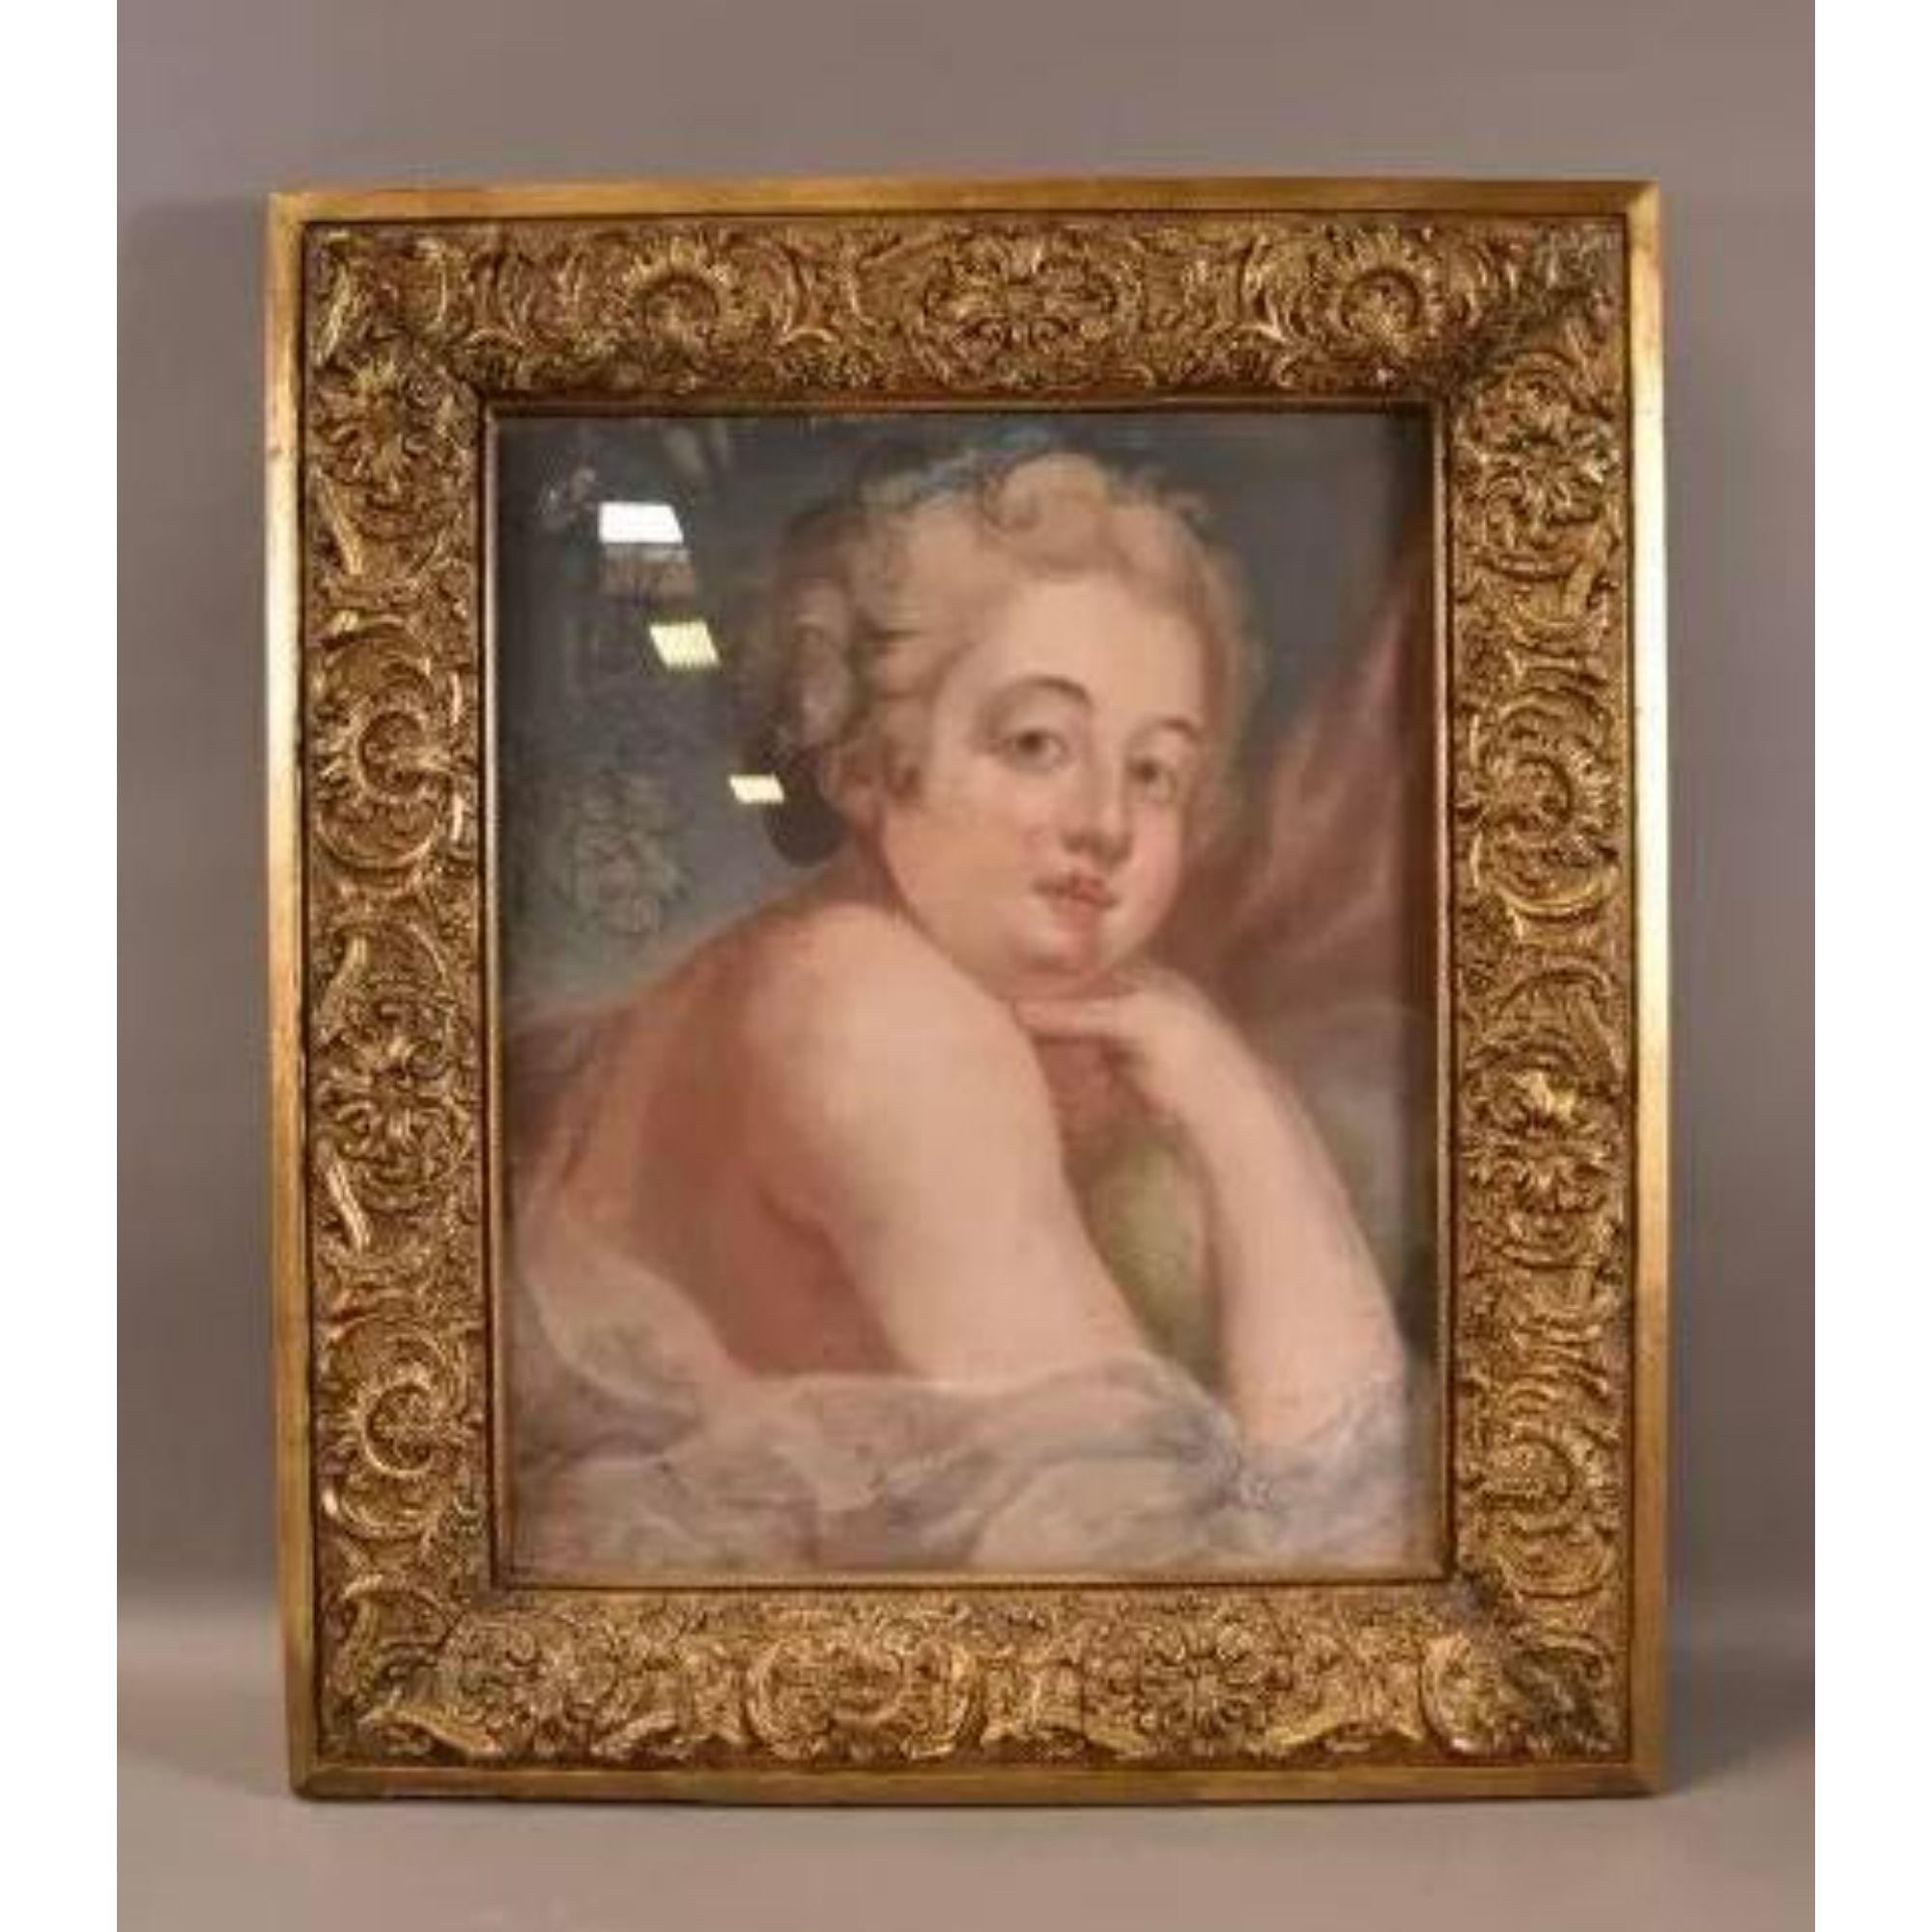 Antique 18th C Pastel Portrait Painting in Giltwood Frame

Additional information: 
Materials: Giltwood, Pastel
Color: Pink
Period: 18th Century
Styles: French
Art Subjects: Portrait
Frame type: Framed
Item Type: Vintage, Antique or